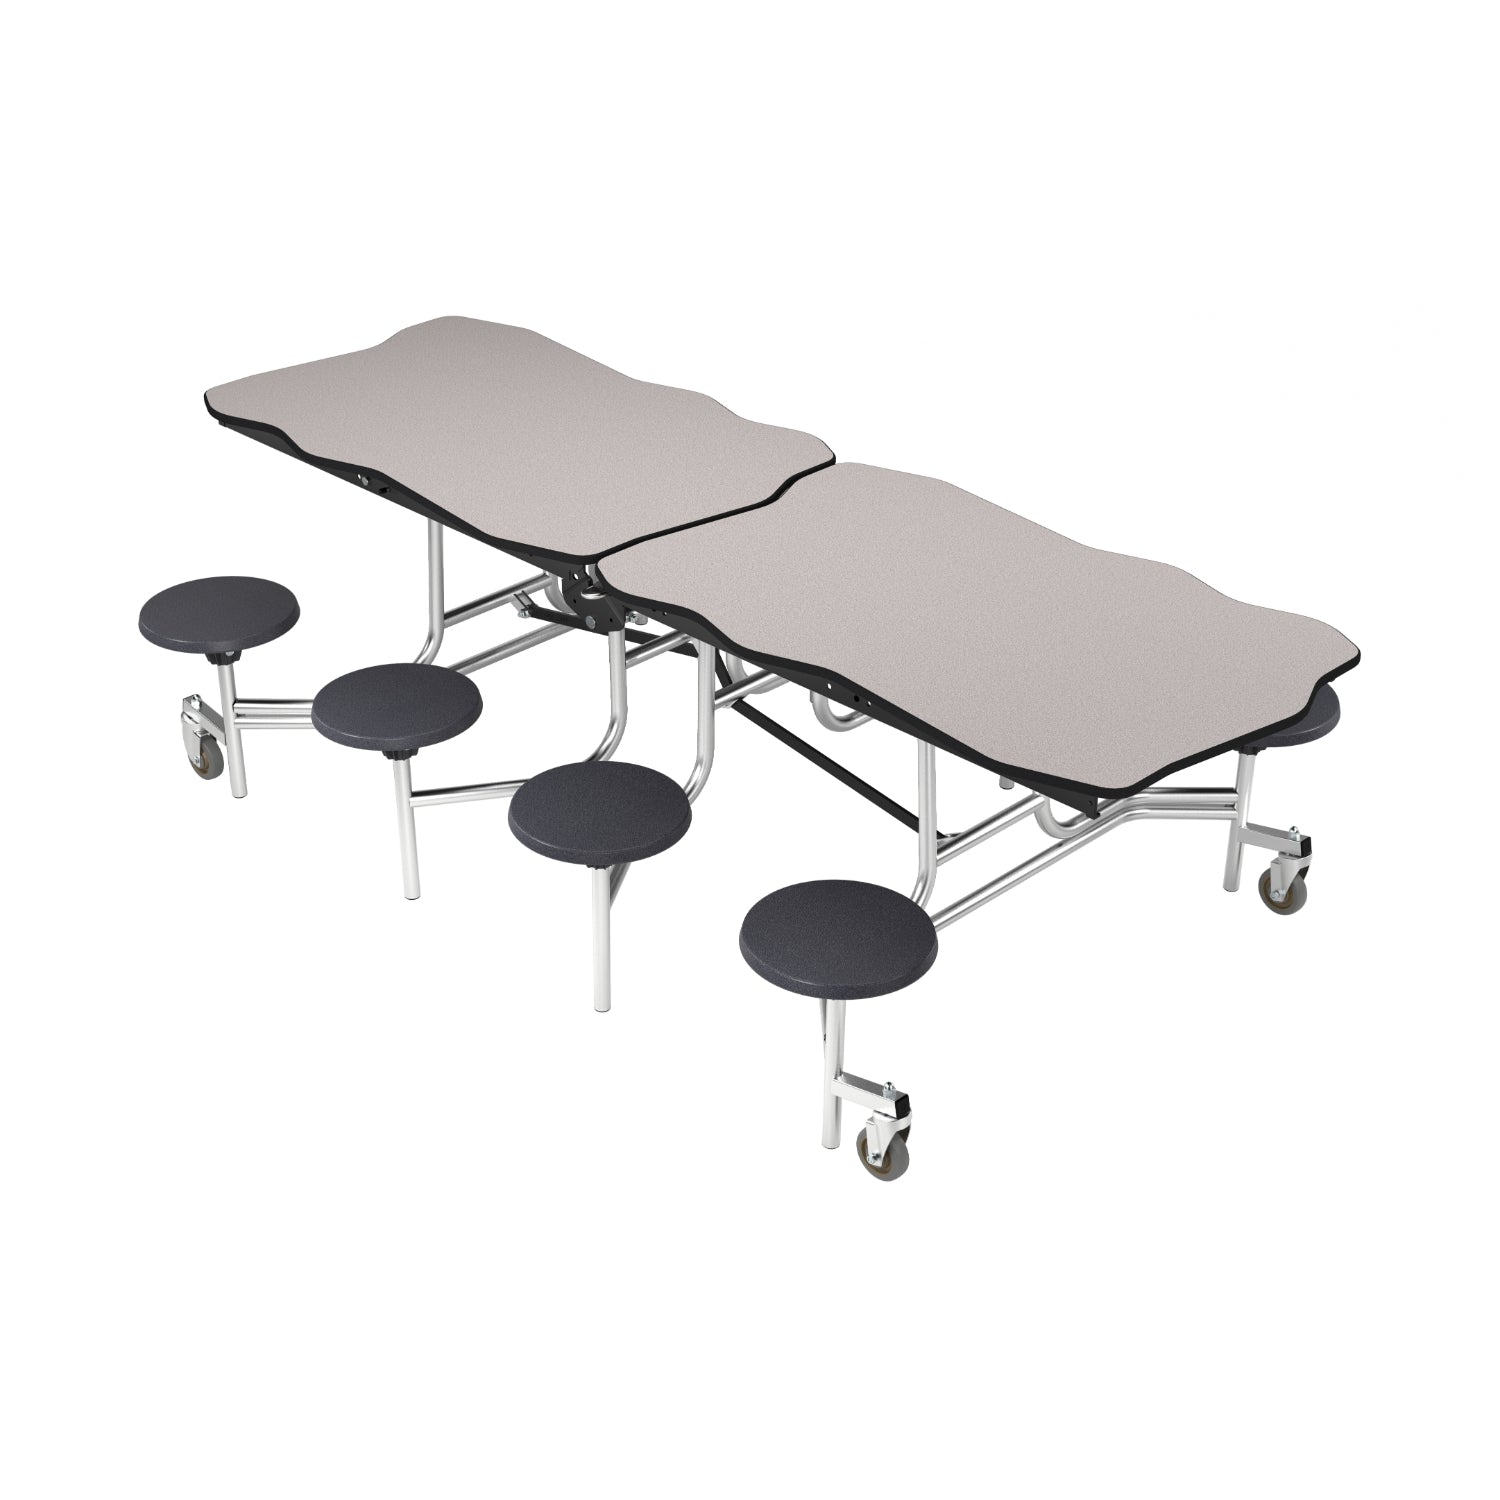 Mobile Cafeteria Table with 8 Stools, 8' Bedrock, Particleboard Core, Vinyl T-Mold Edge, Chrome Frame